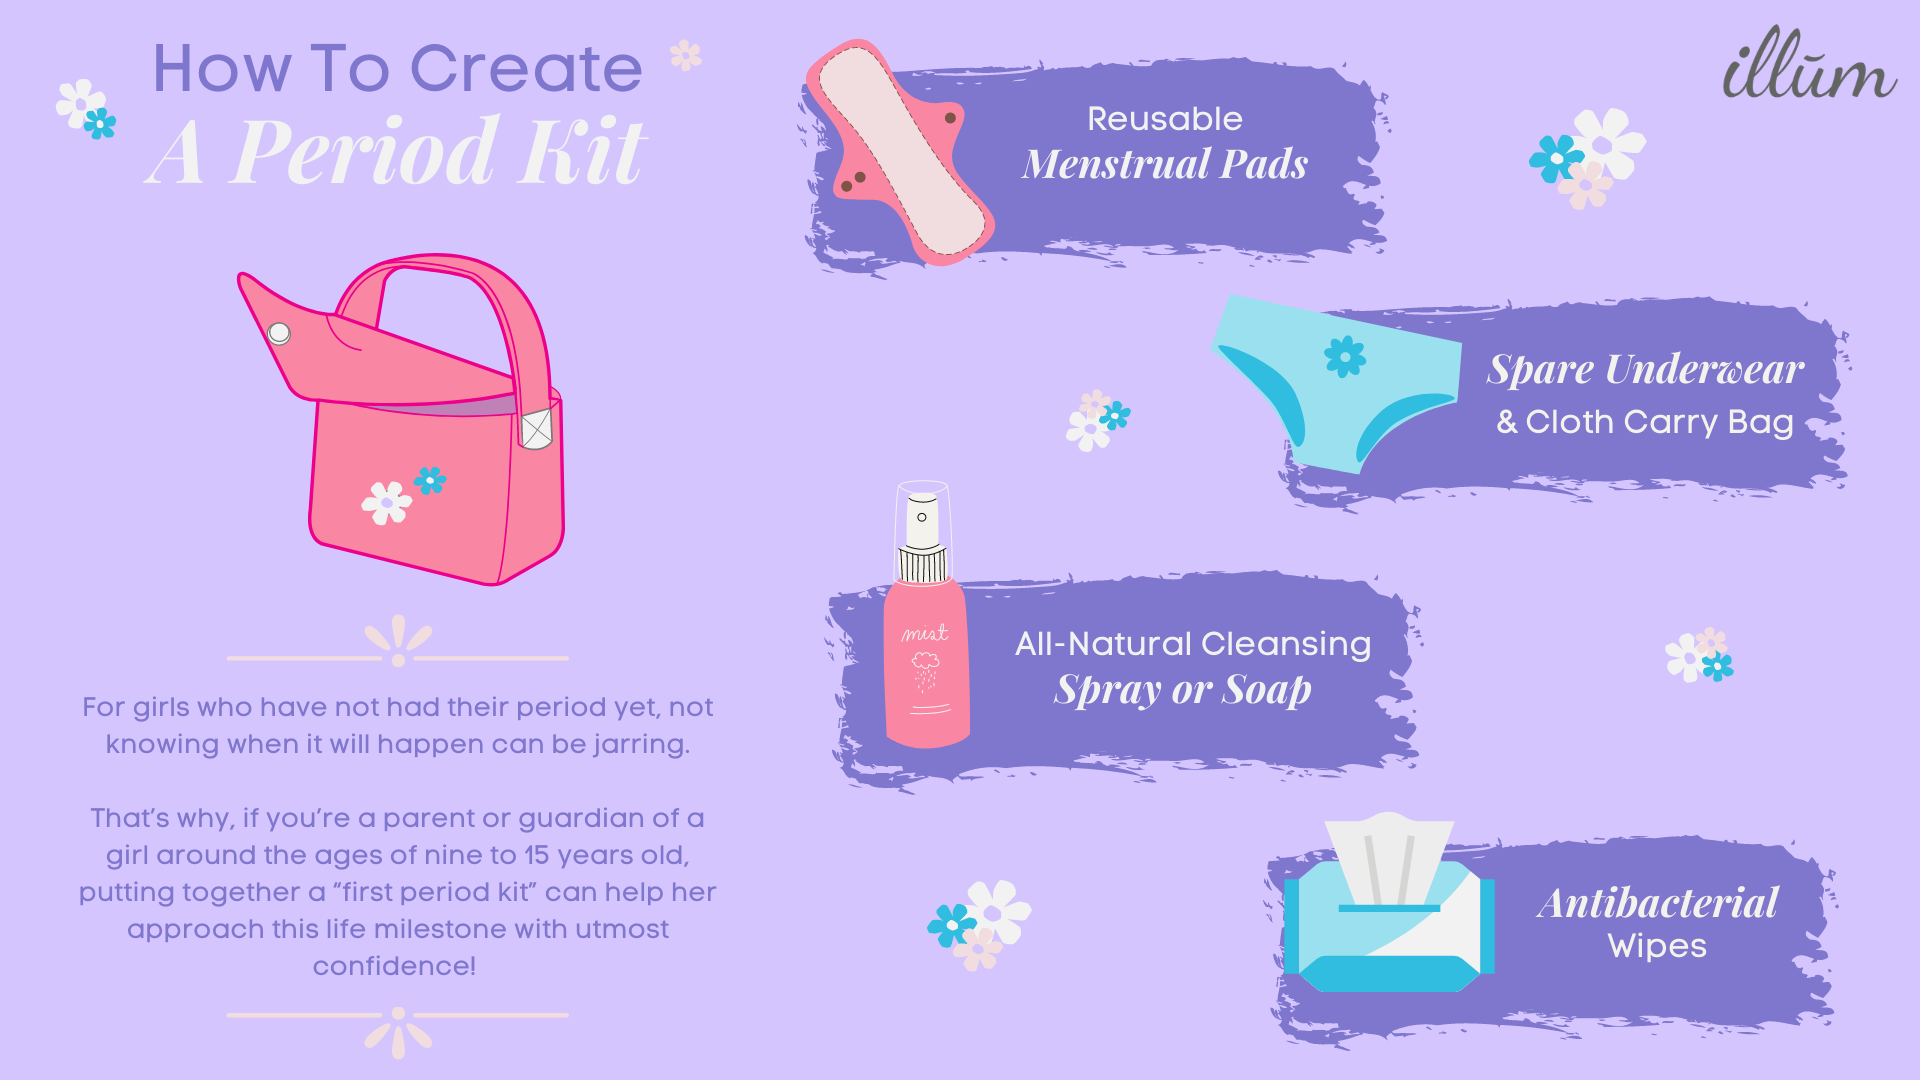 How to Create a Period Kit